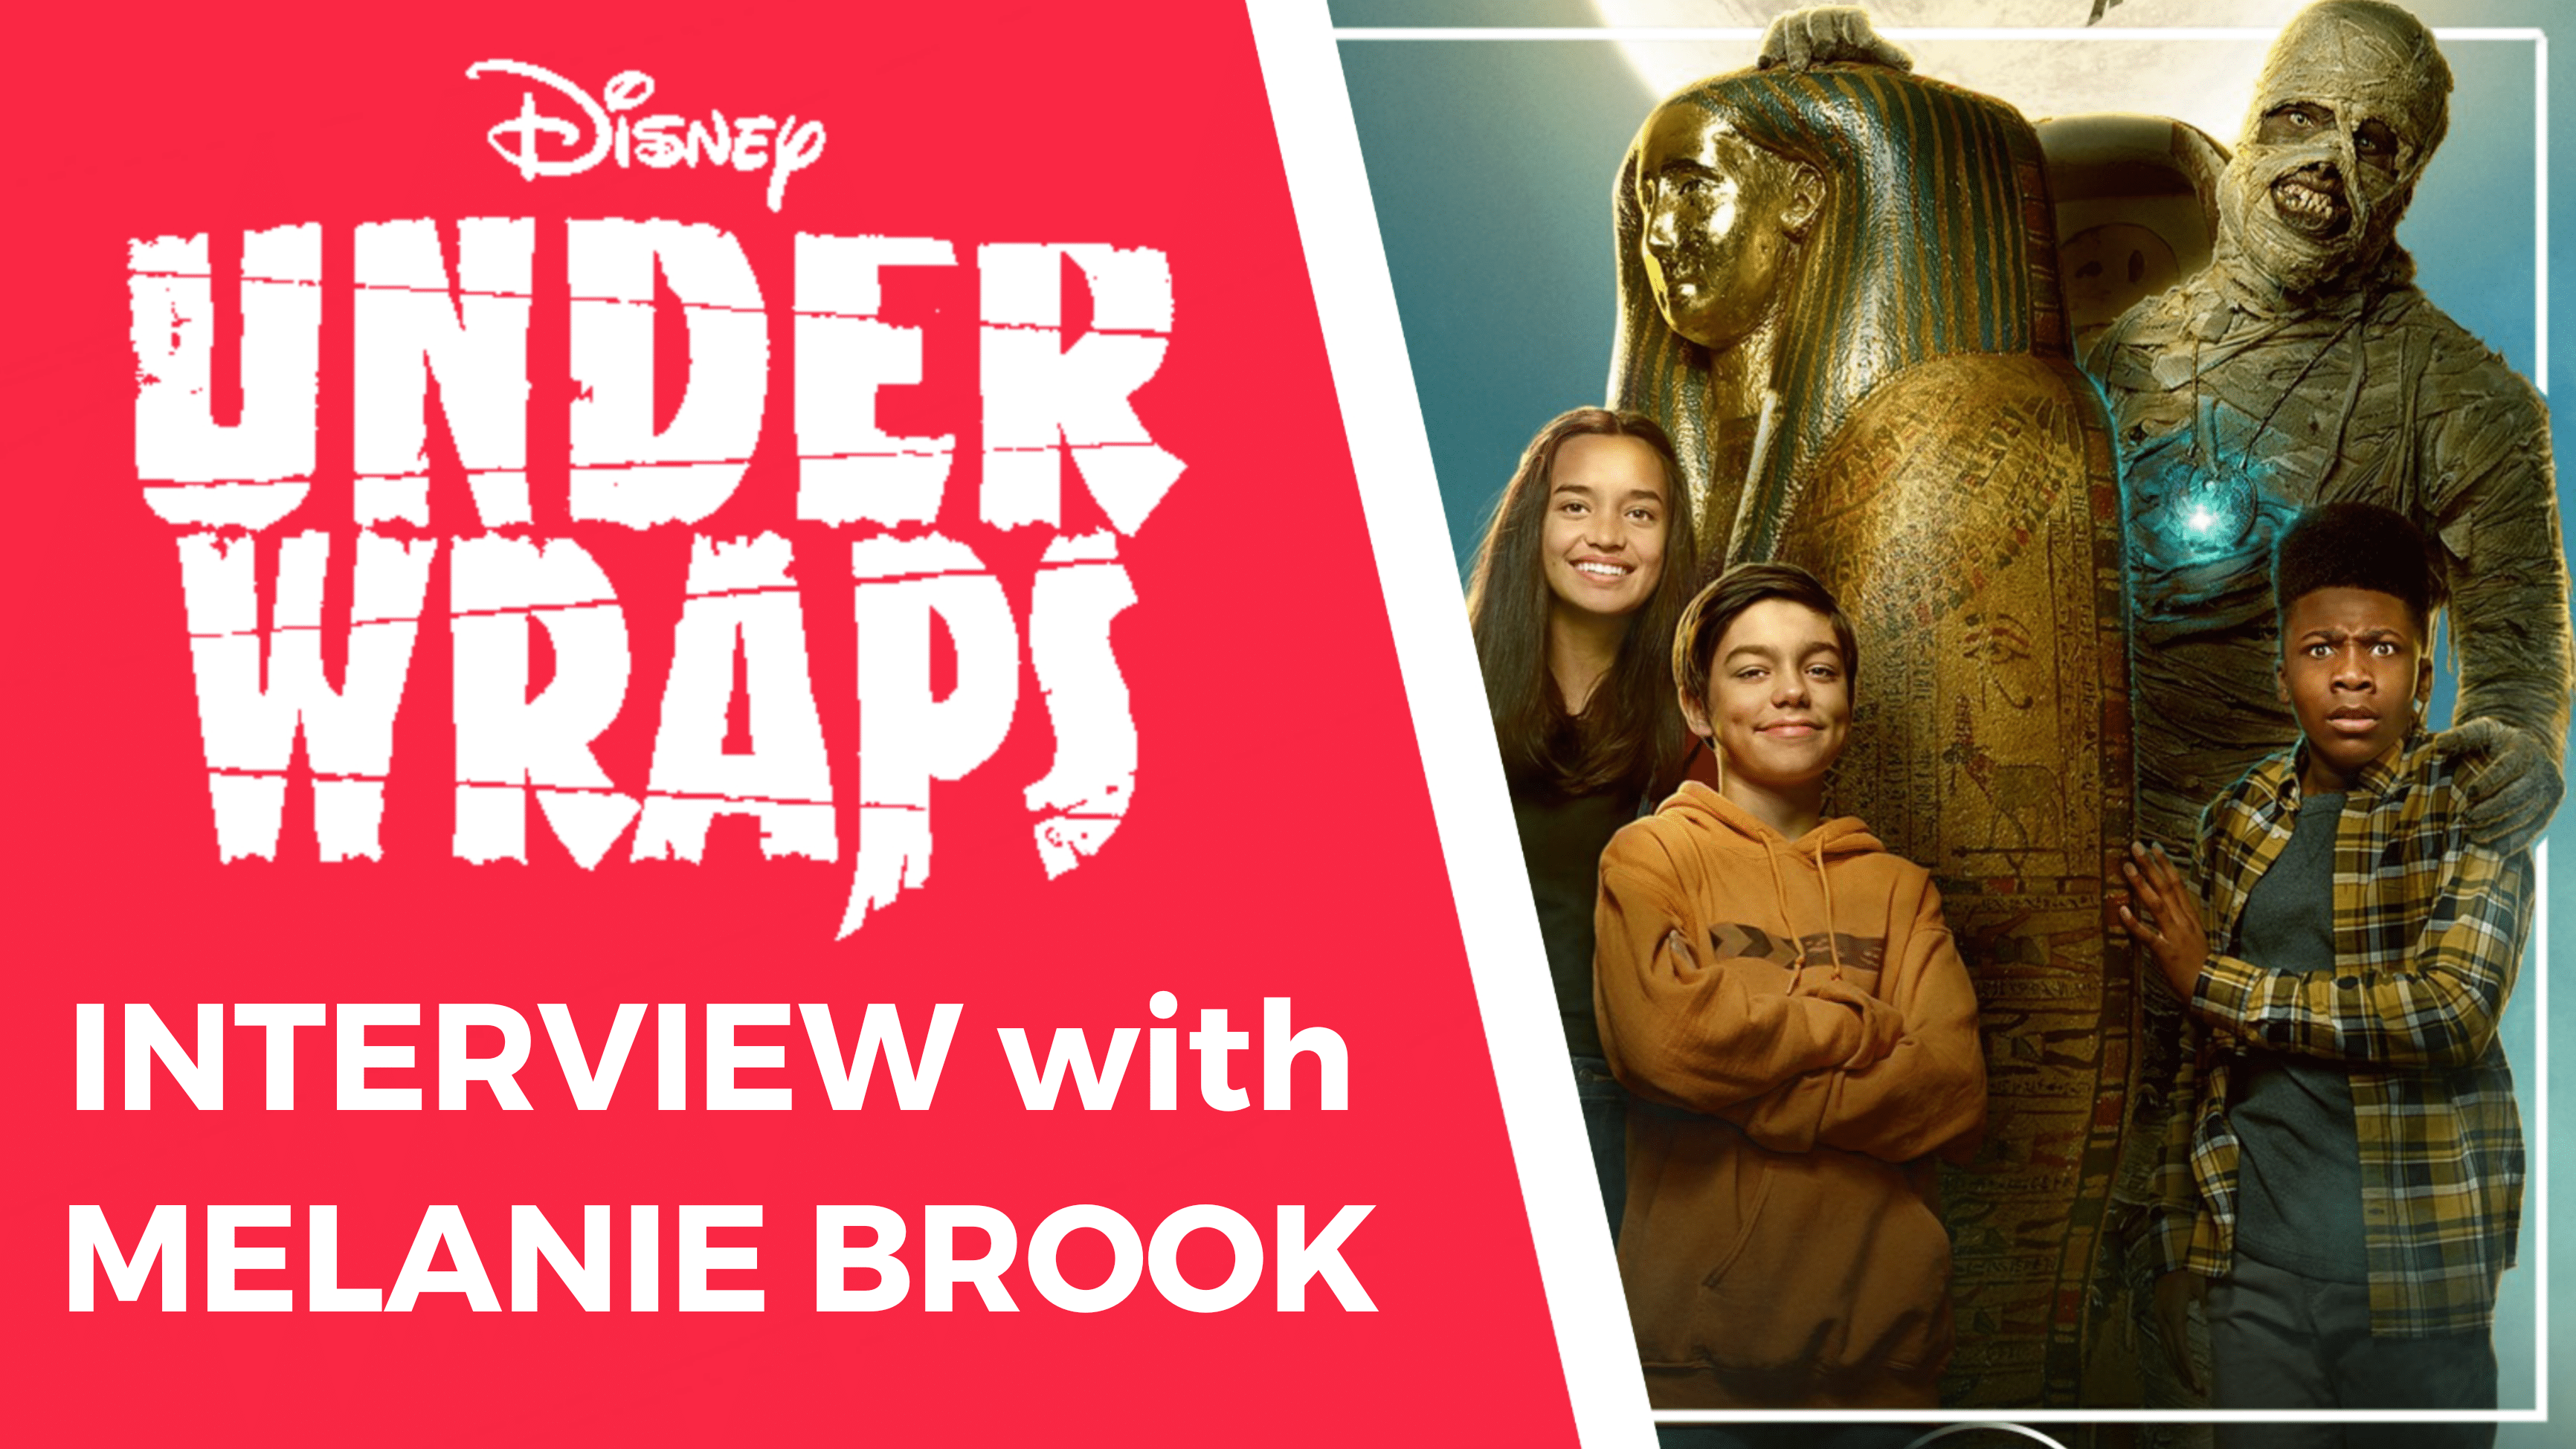 EXCLUSIVE: Actress Melanie Brook Speaks About Starring In Disney’s ‘Under Wraps’ Reboot, Lizzie McGuire, And More! (INTERVIEW)